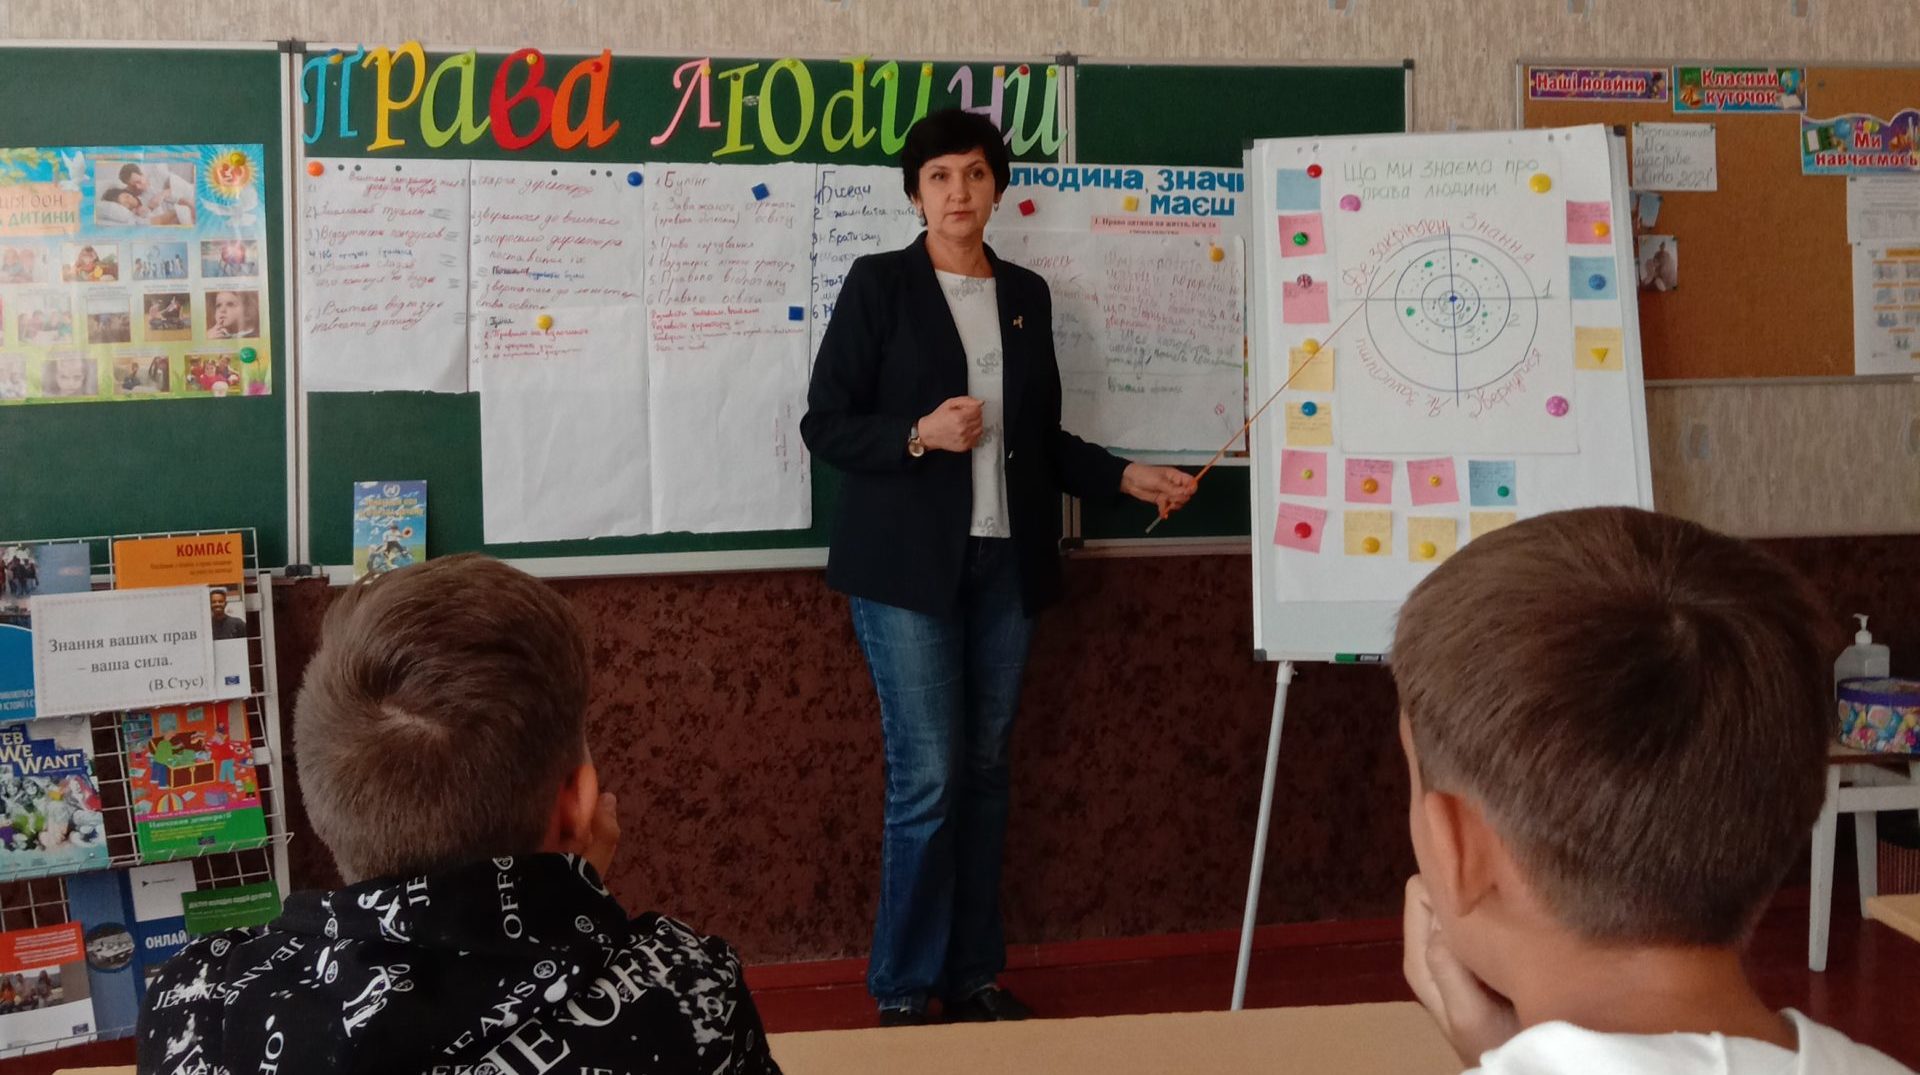 Project participant Valentyna Chyrva teaching a class on human rights in her school “Gymnasium №12”. 2022 Kamianske, Ukraine. 